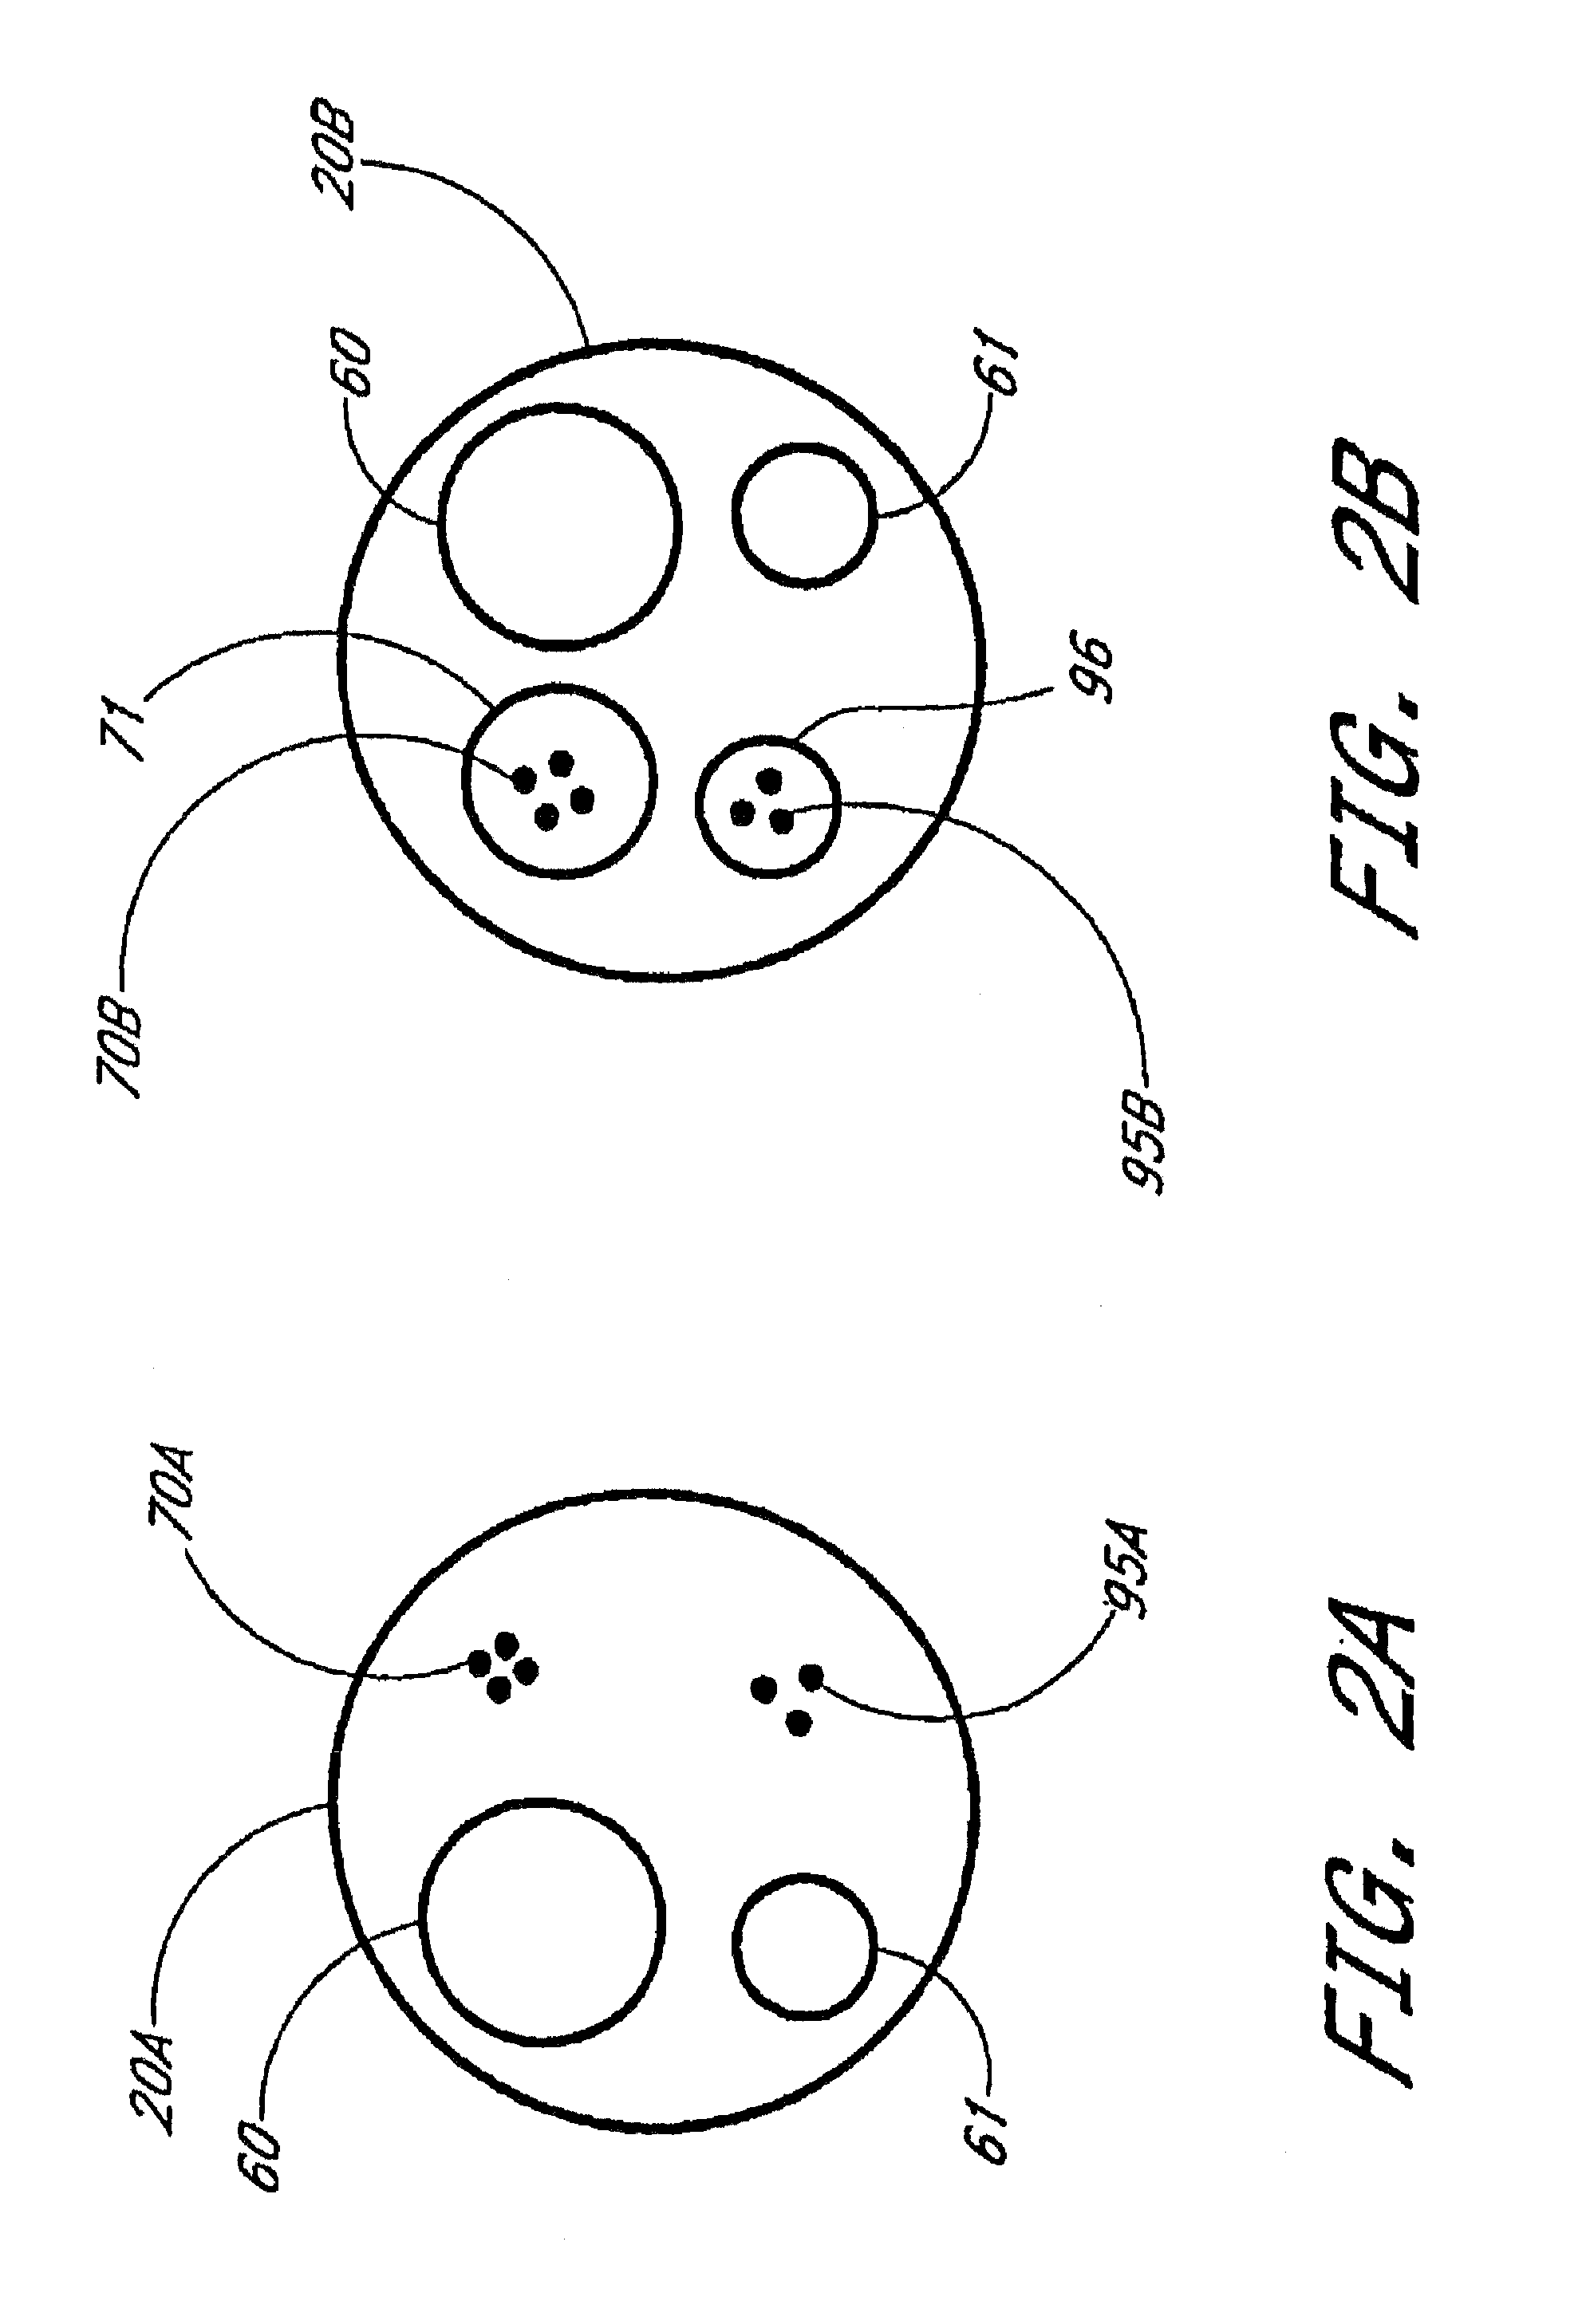 Impedance devices and methods of using the same in connection with a mammalian vasculature